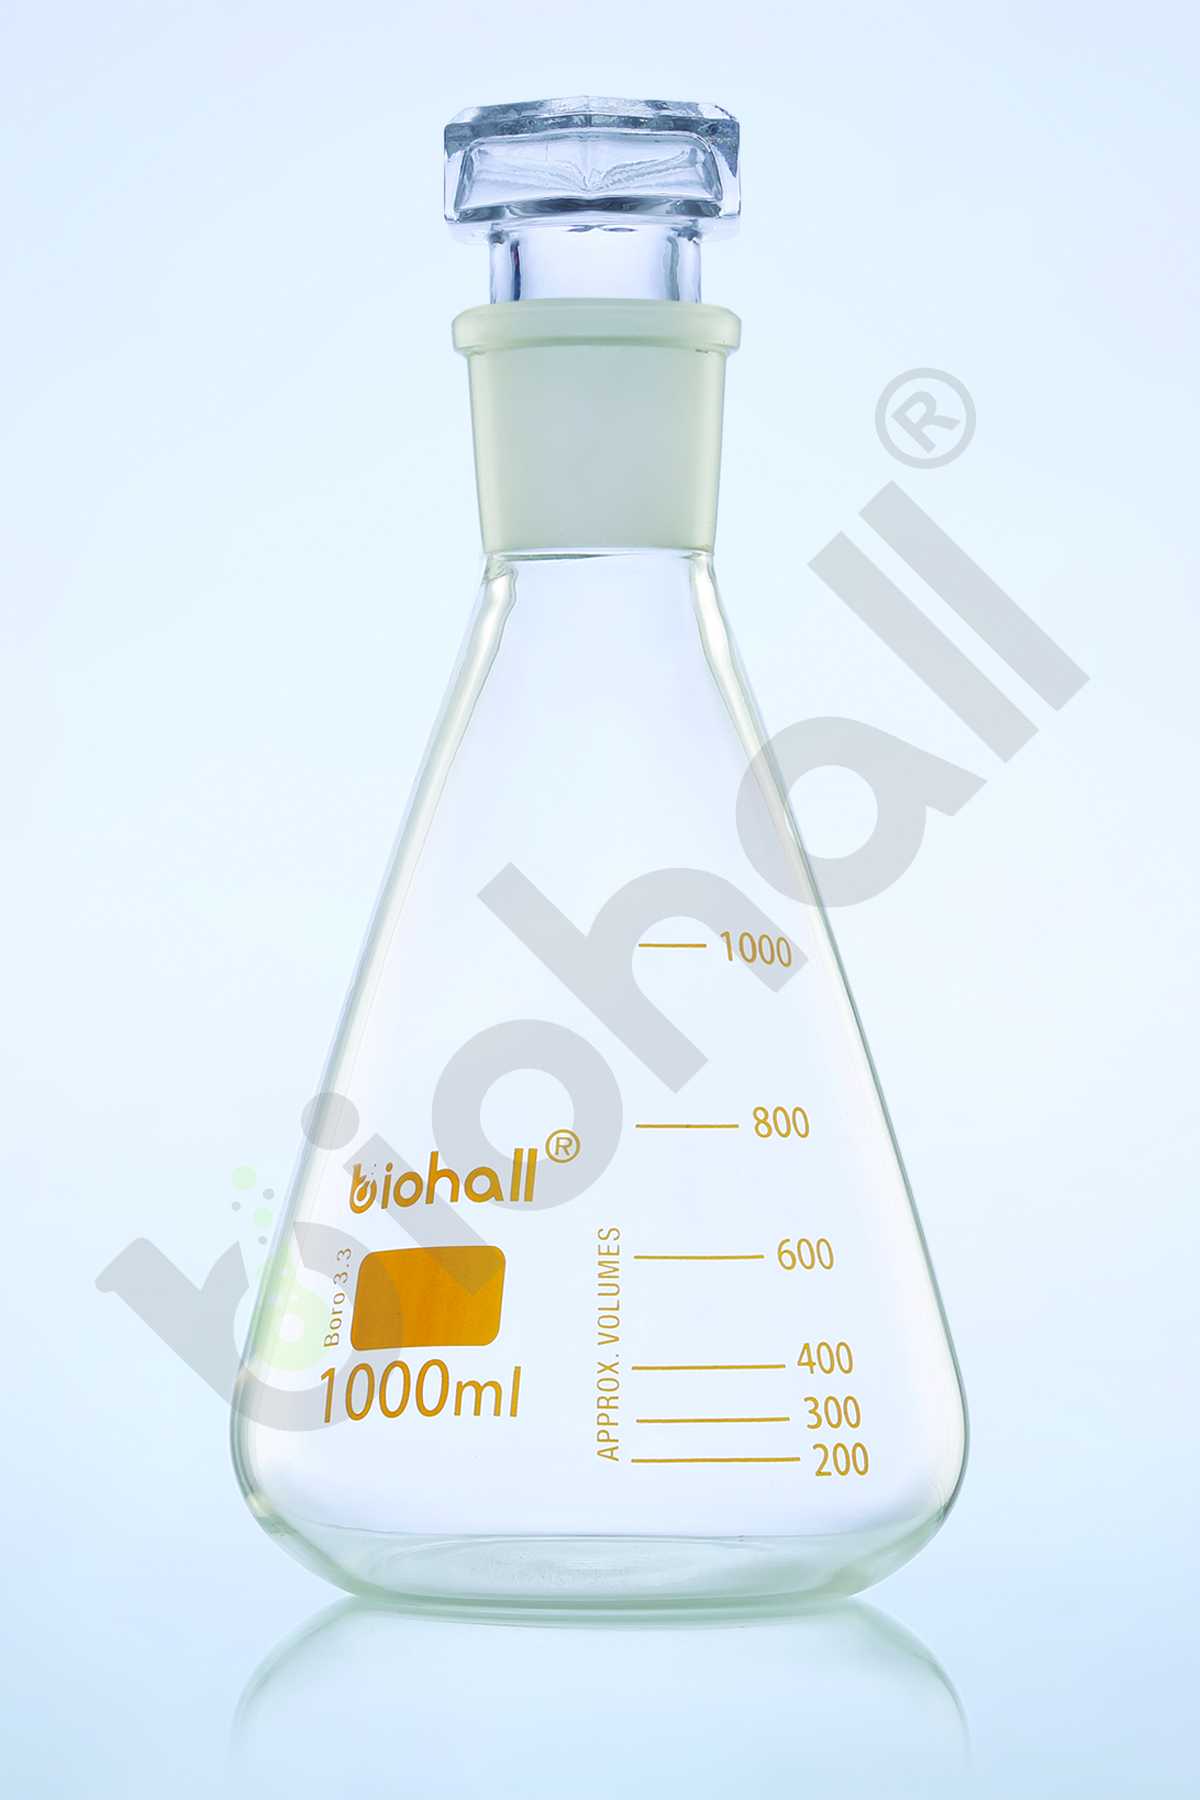 Conical (Erenmeyer) Flask With Glass Stopper